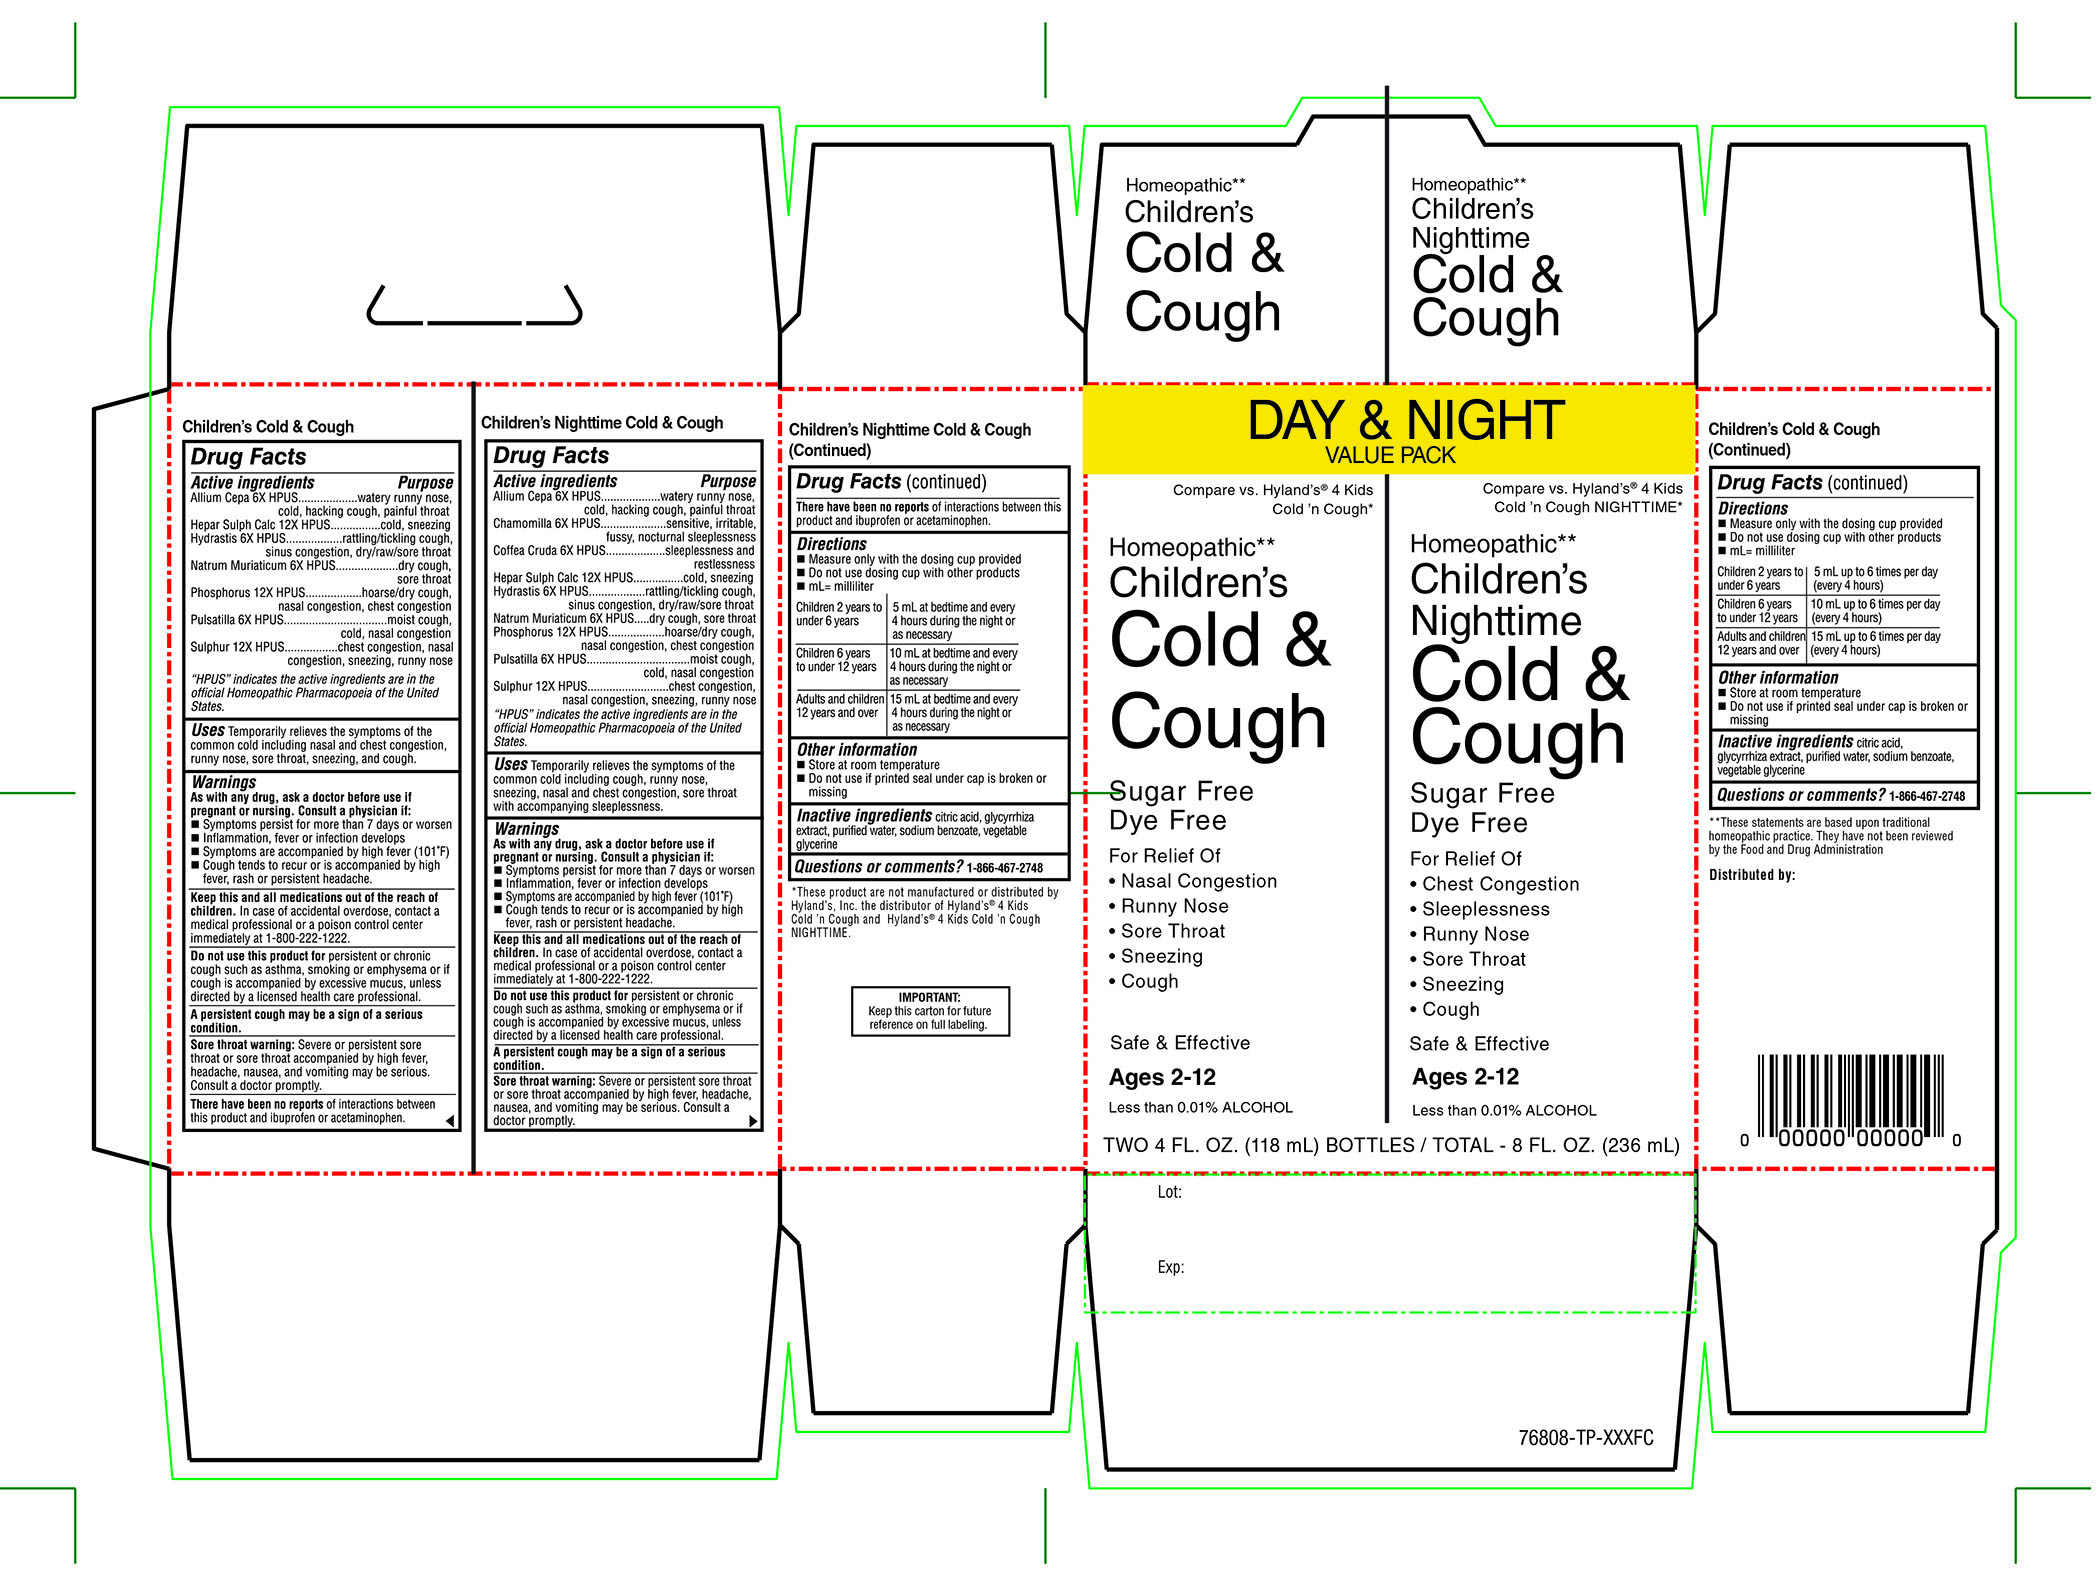 Day and Night Value pack Childrens Cold and Cough  and Childrens Nighttime  Cold and Cough  Two 4 FL .OZ.Bottles Total 8 FL.OZ 